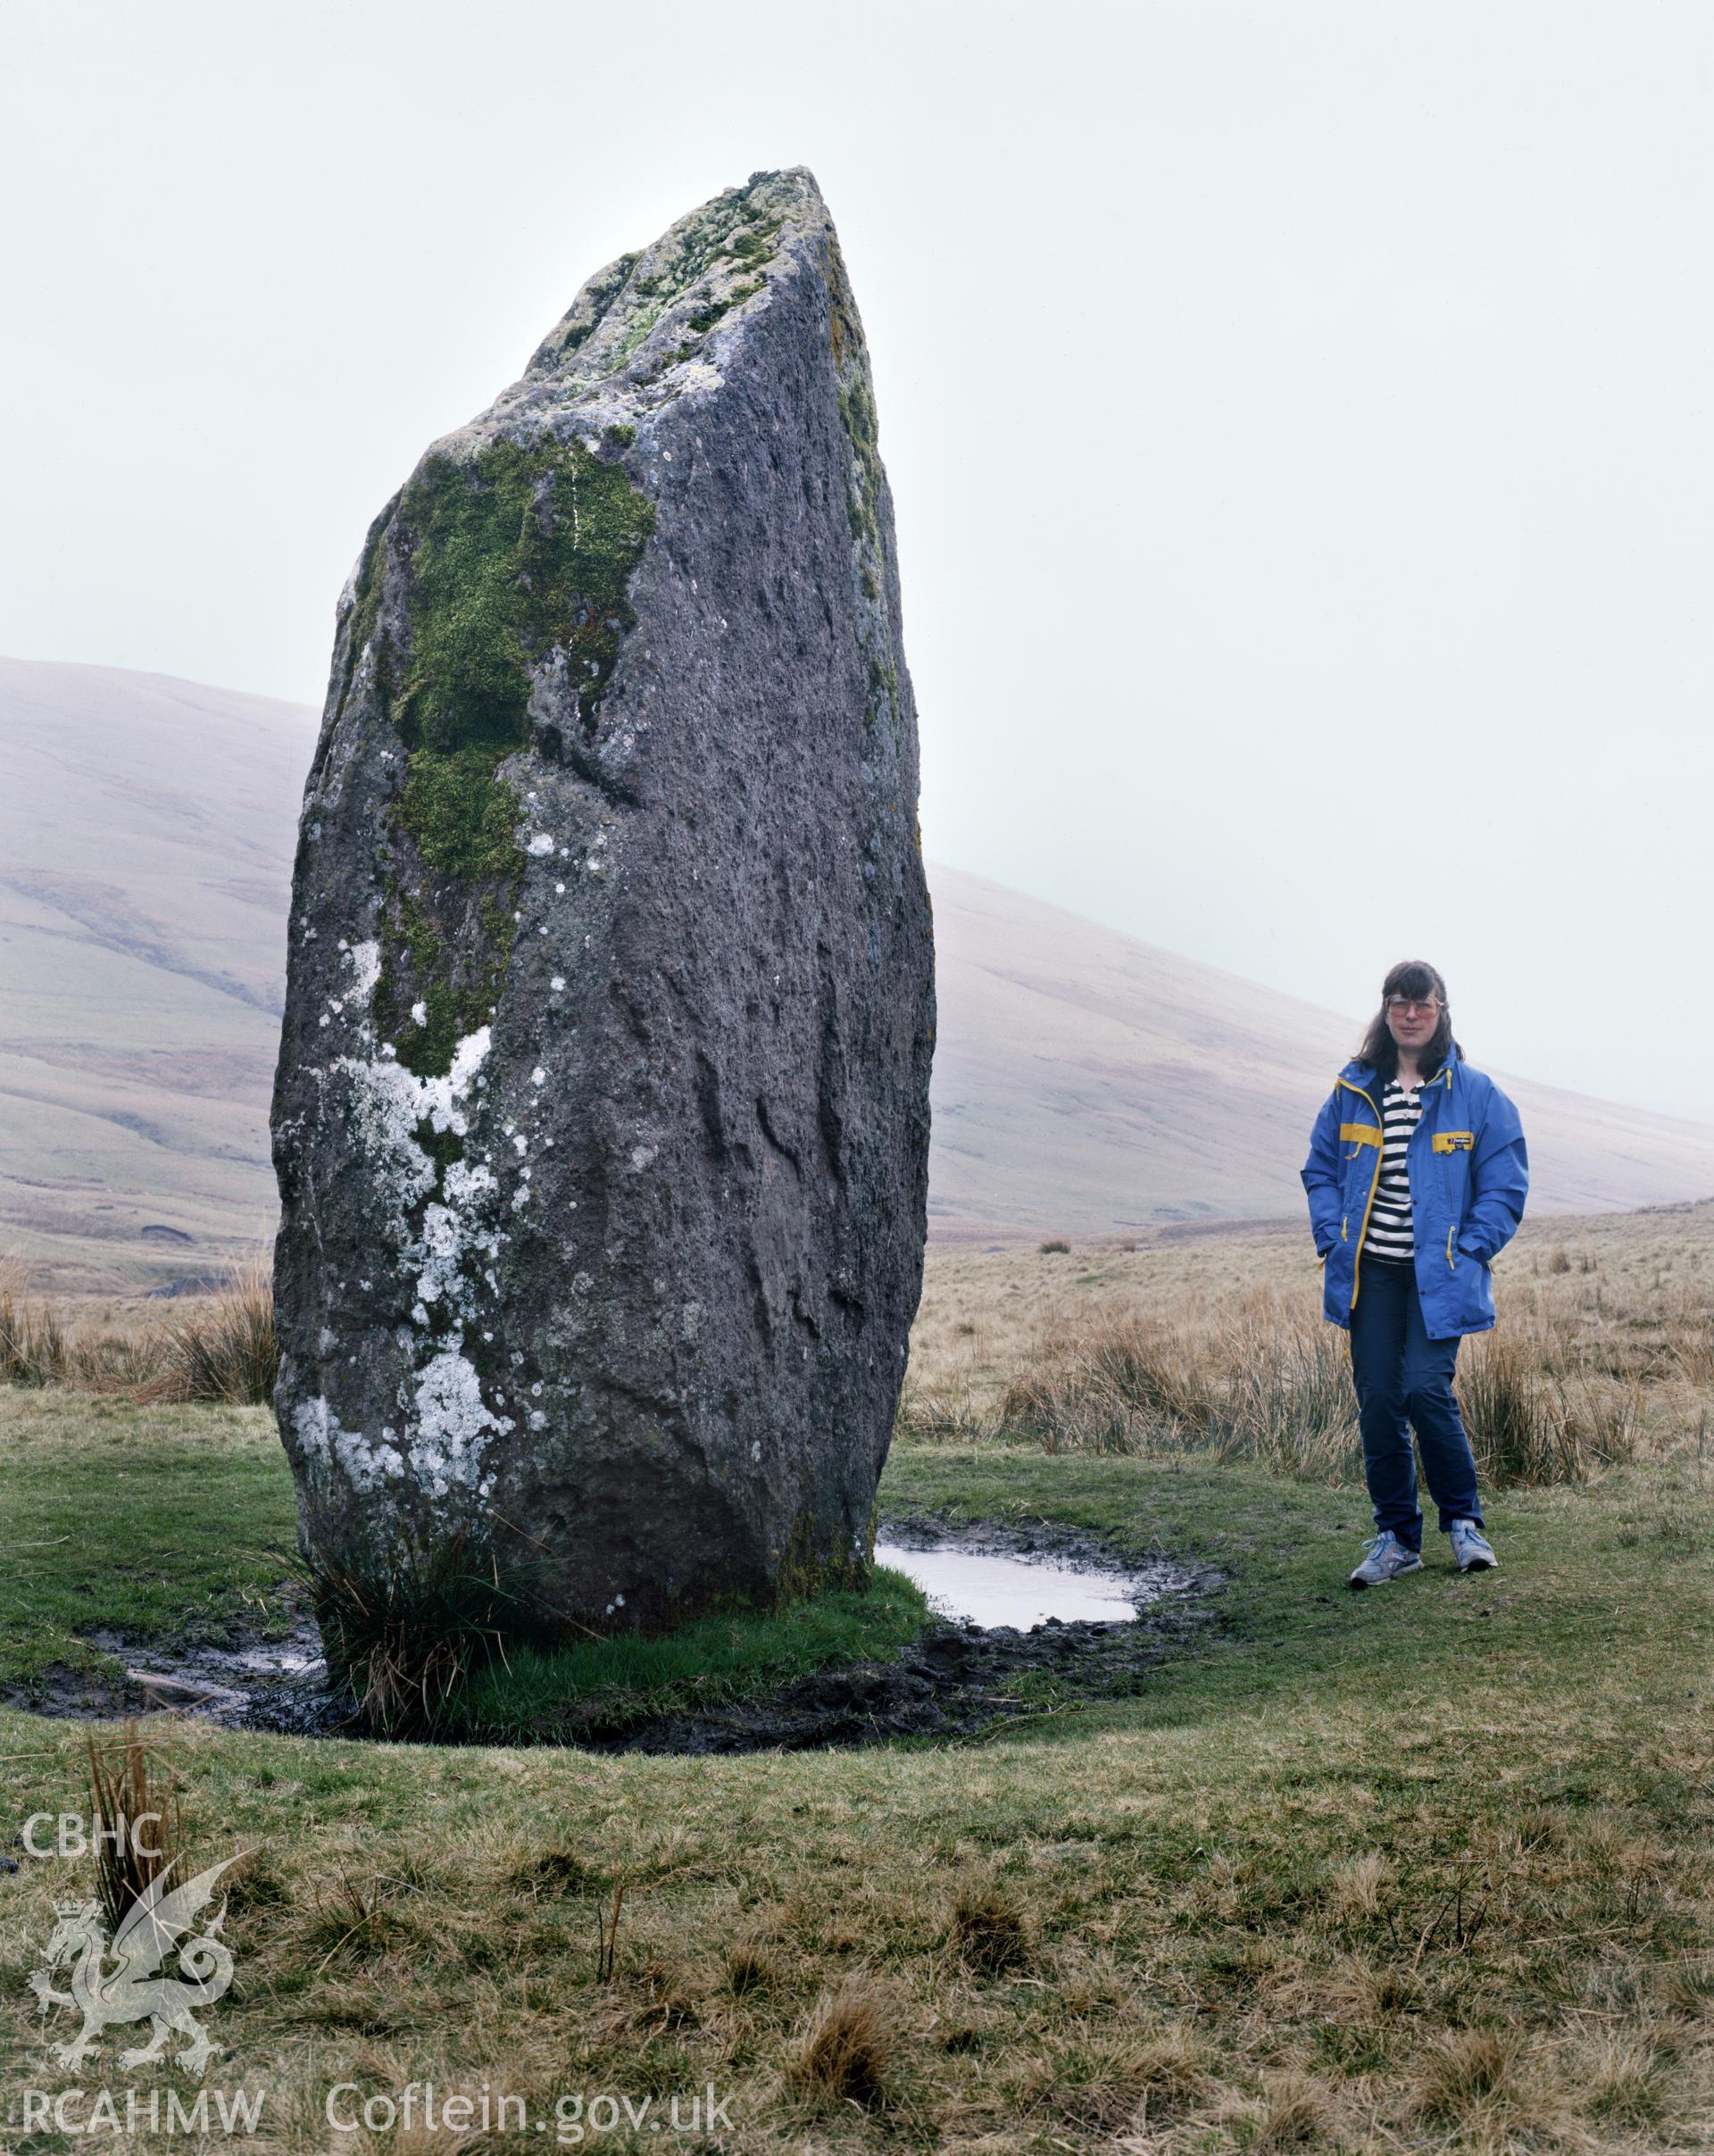 RCAHMW colour transparency showing Maen Llia, taken by Iain Wright, 1981